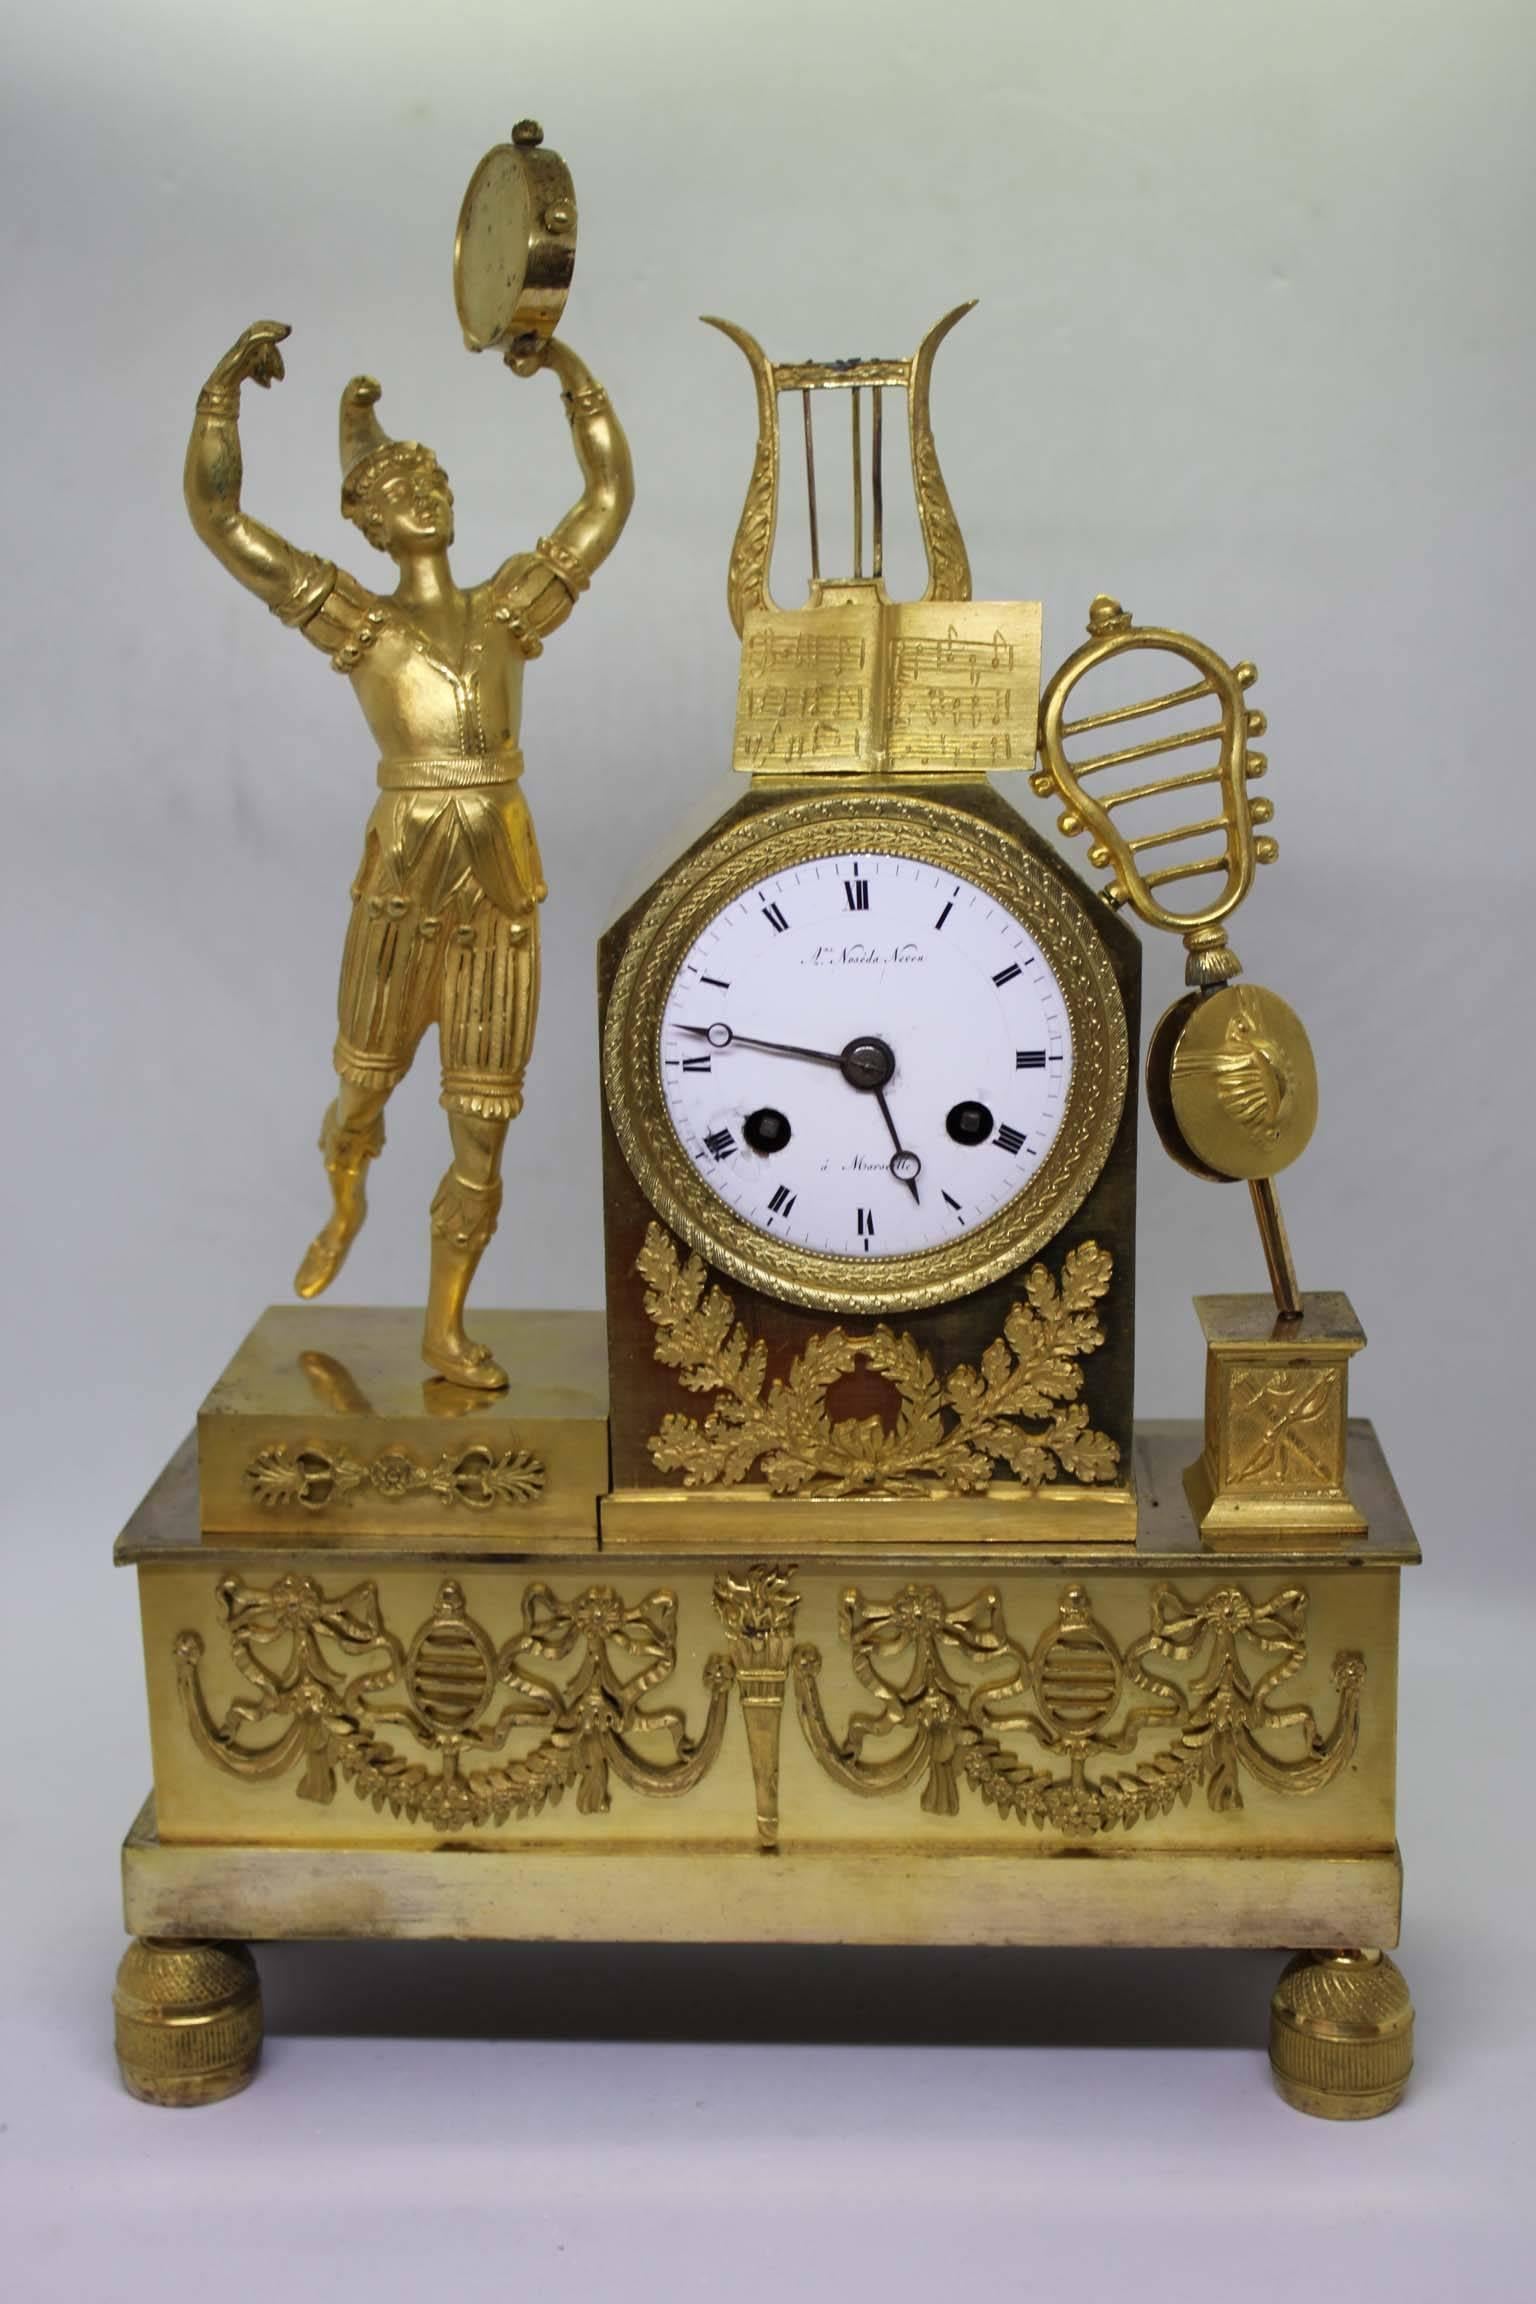 Gilt Bronze mantel clock representing allegory of music, from French Restauration period. 
Dial is signed 